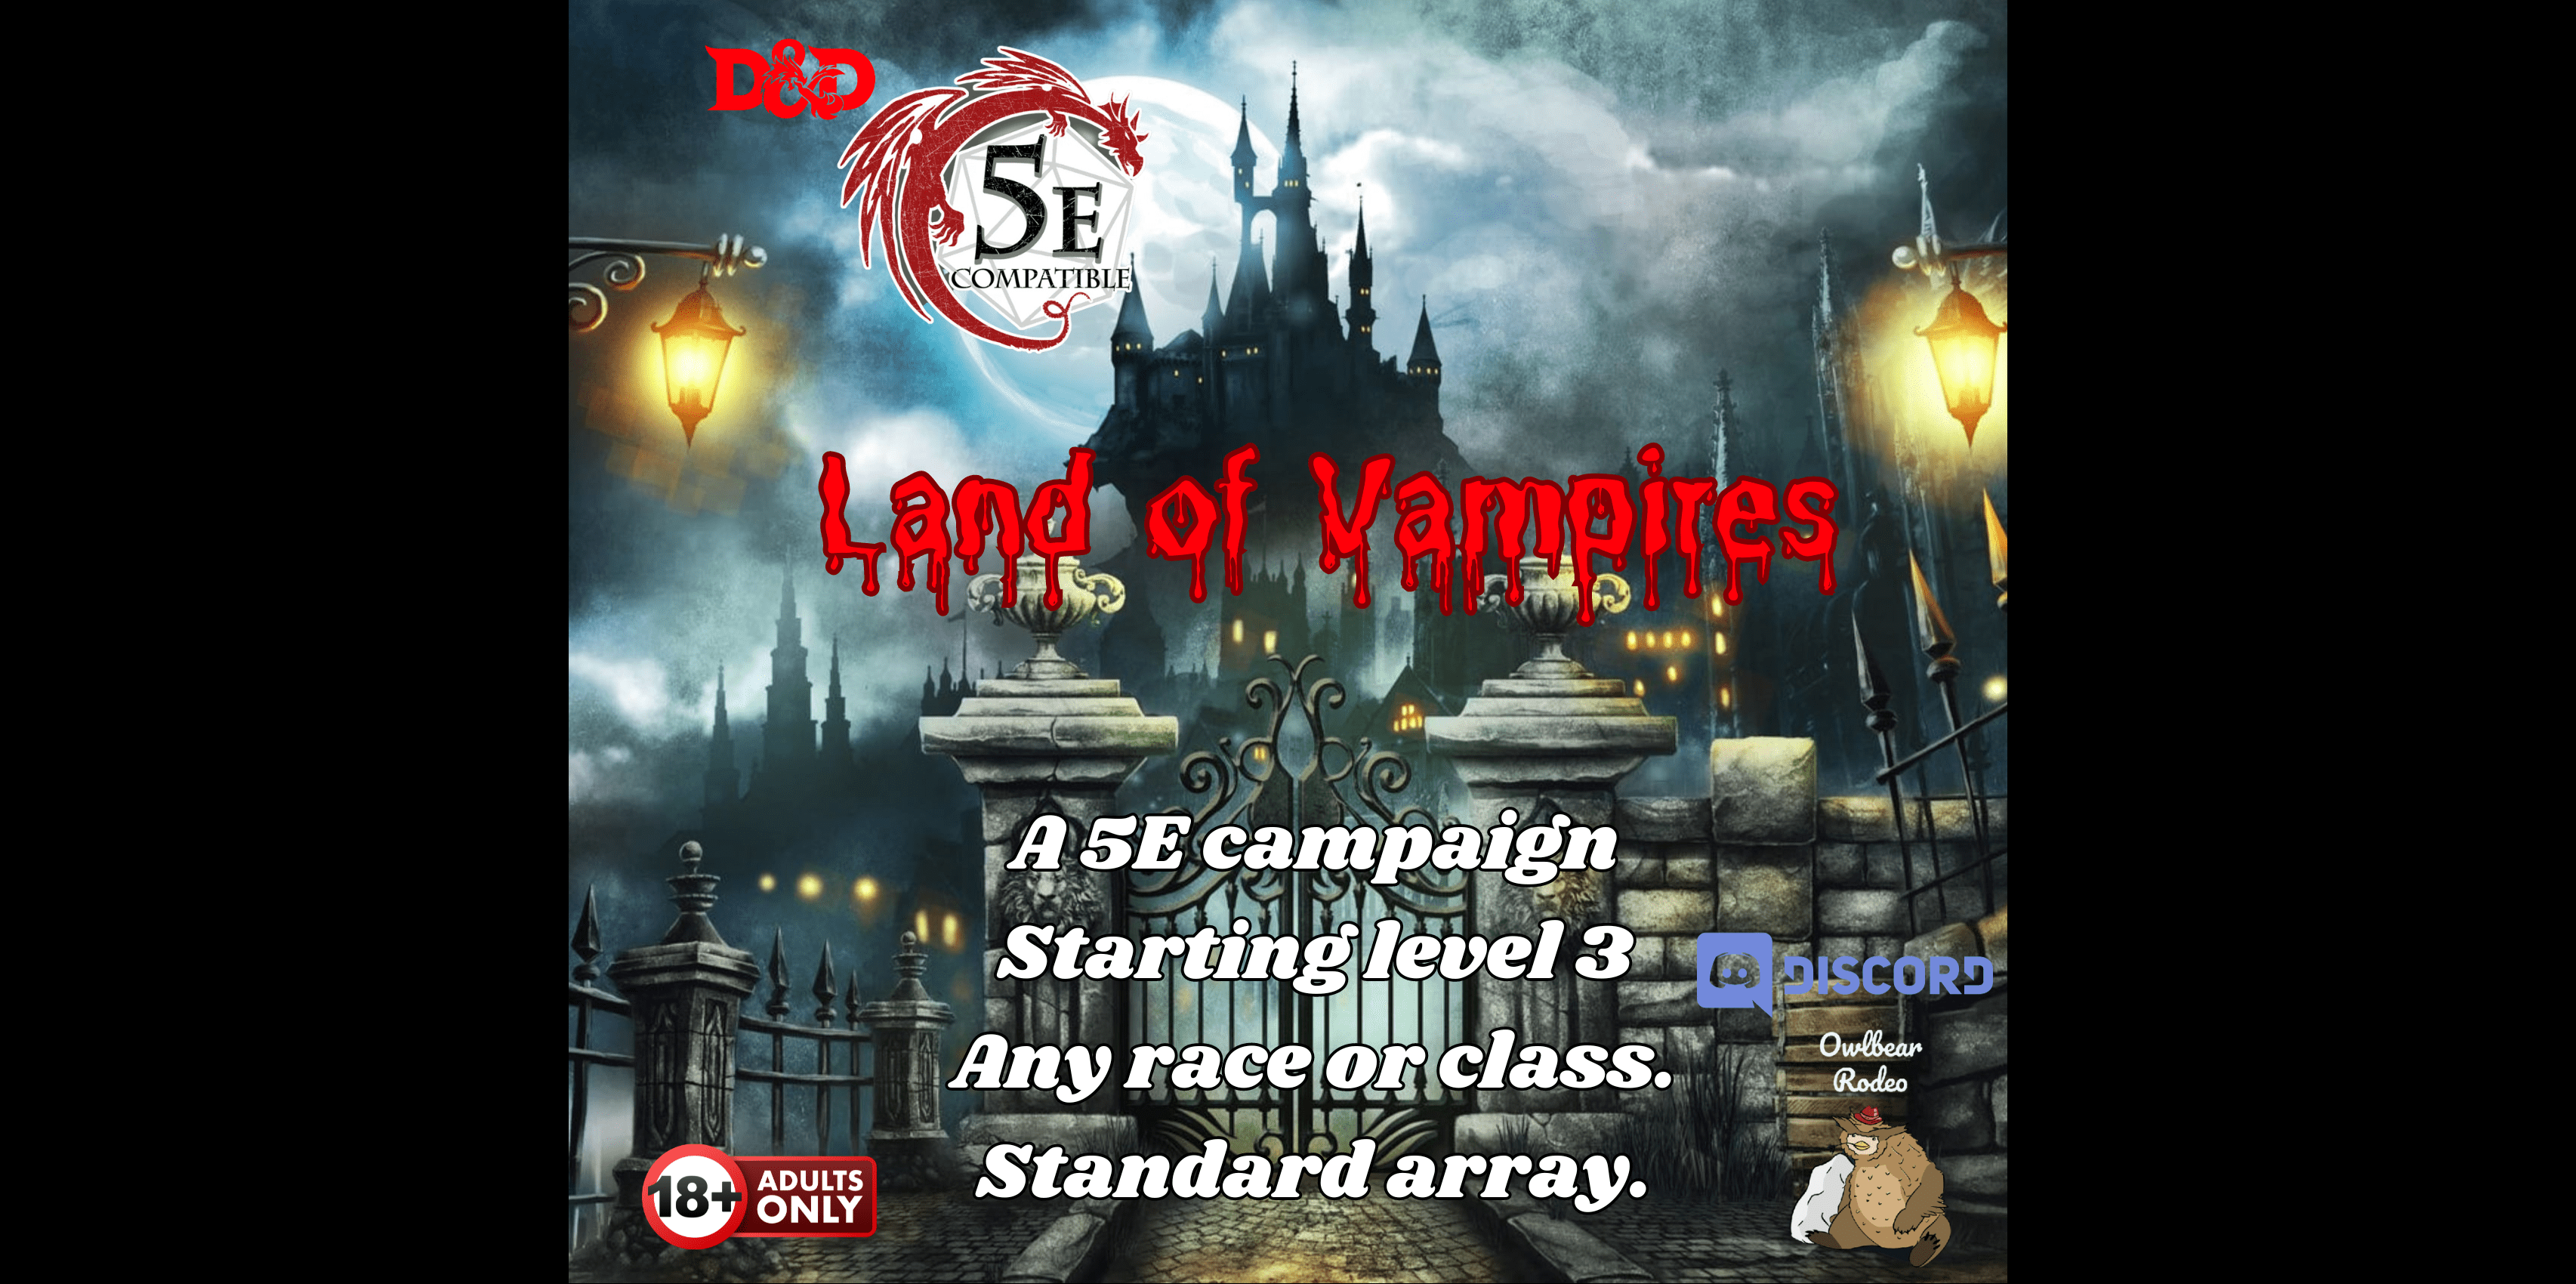 Land of Vampires- D&D 5E compatible vampire themed campaign 